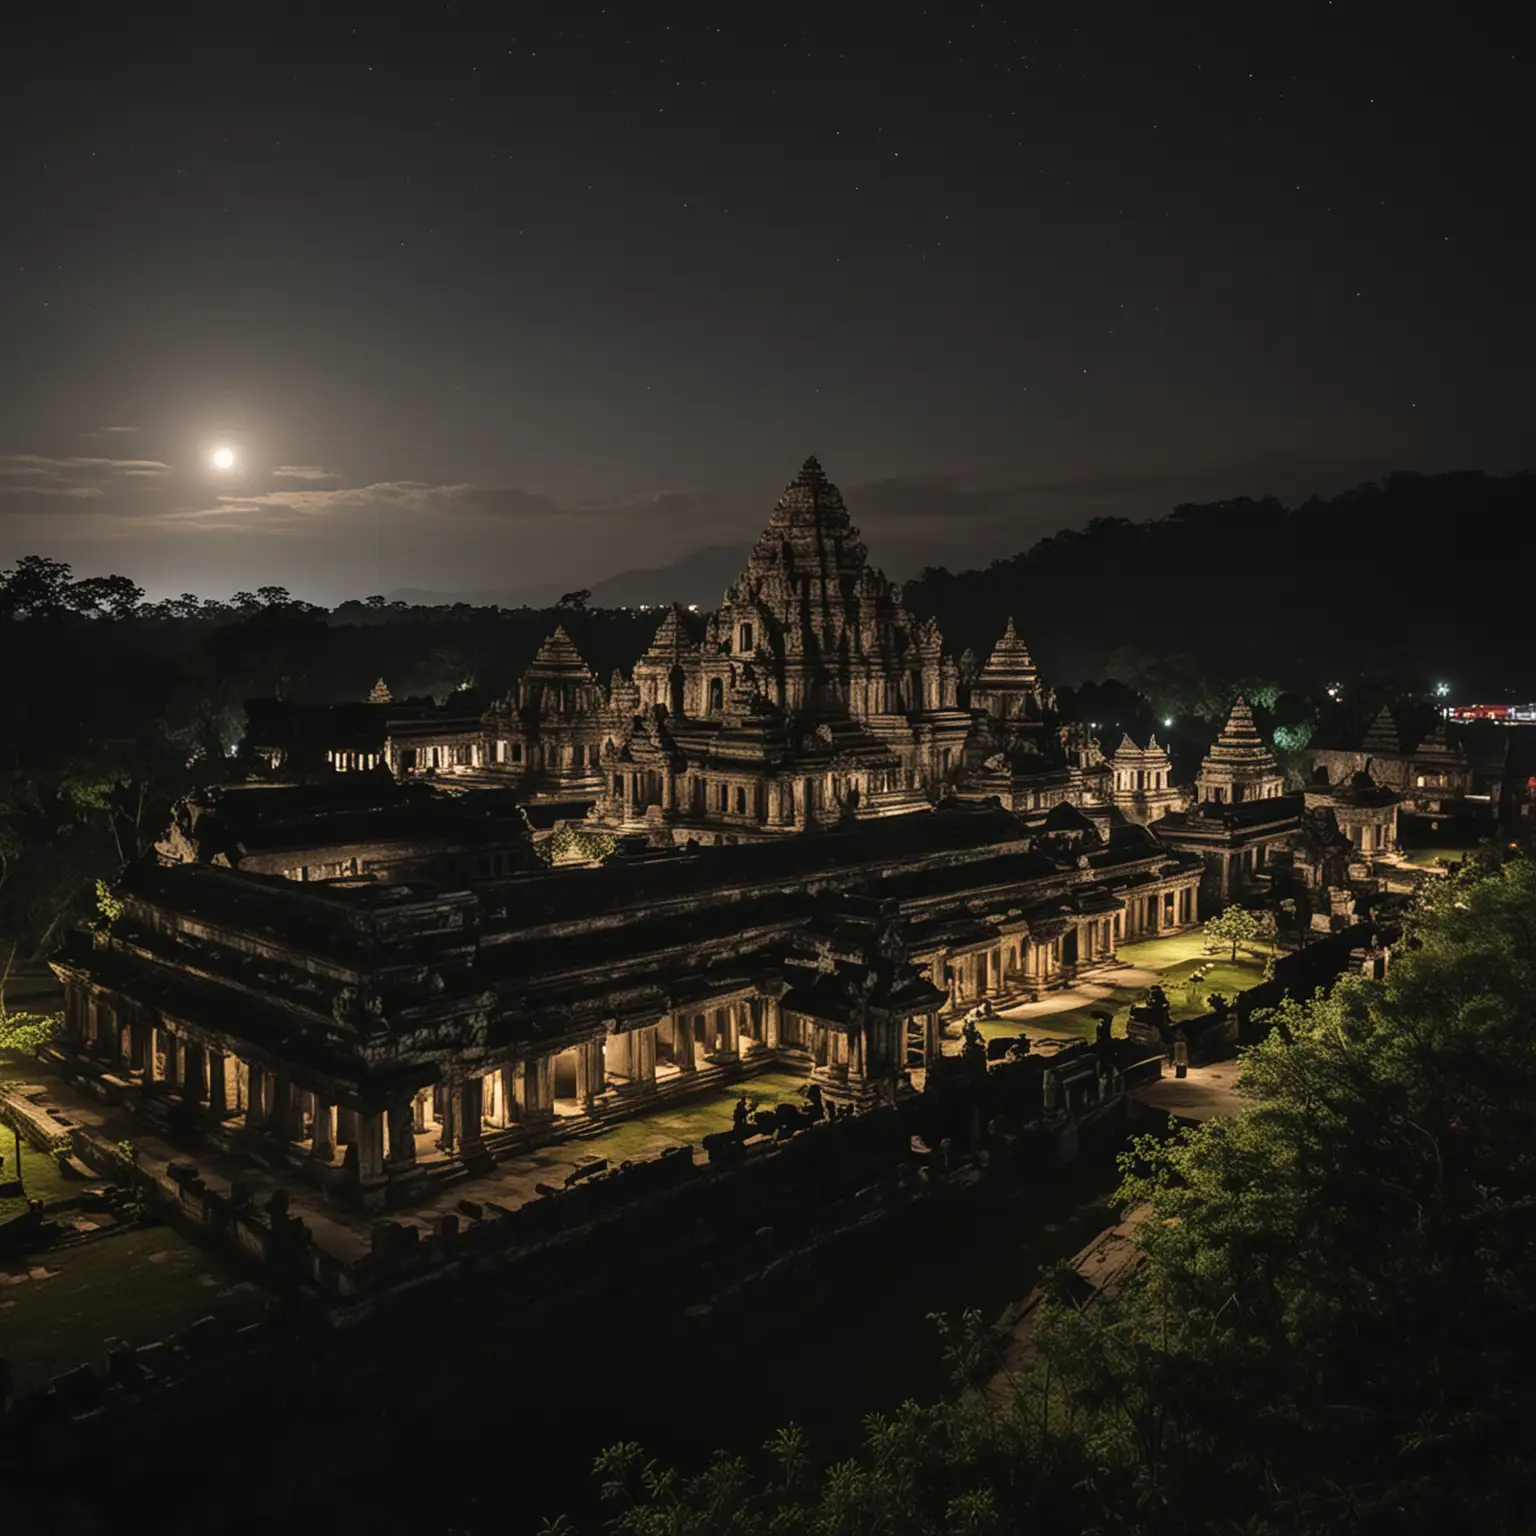 view of Indonesia's ancient stone temple palace at night